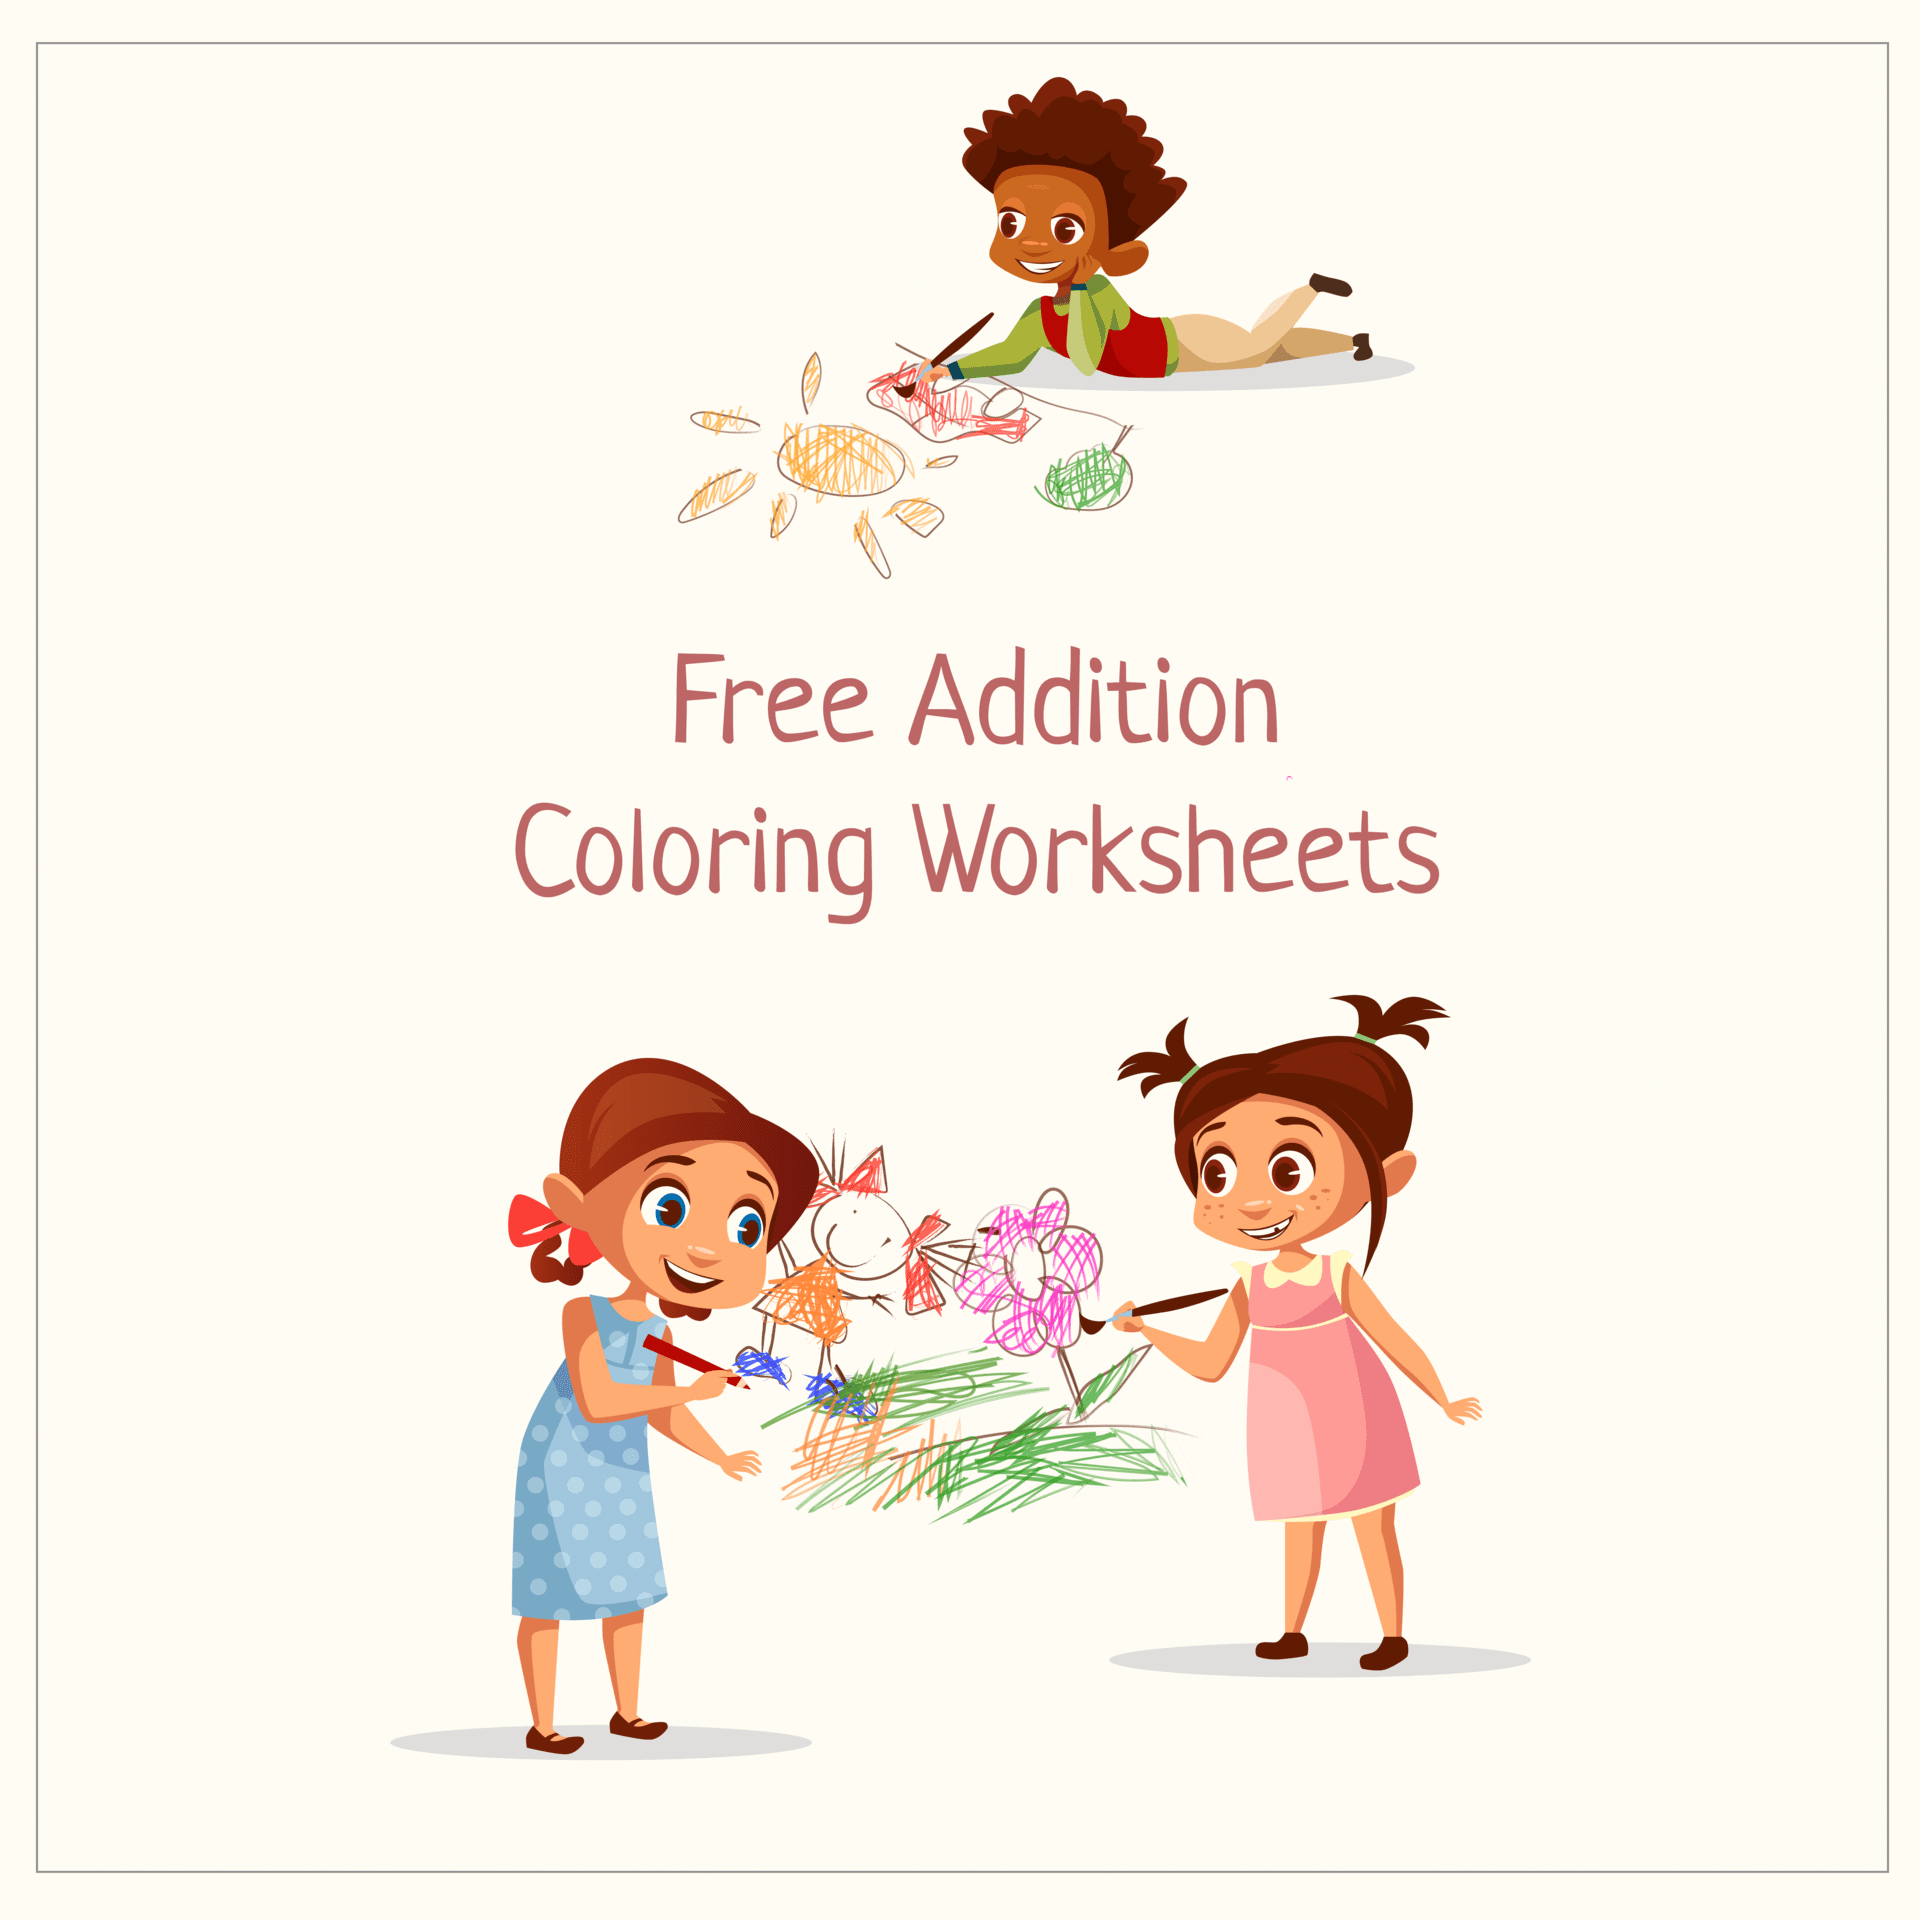 15 Free Addition Coloring Worksheets PDF | 4 Fun Activities